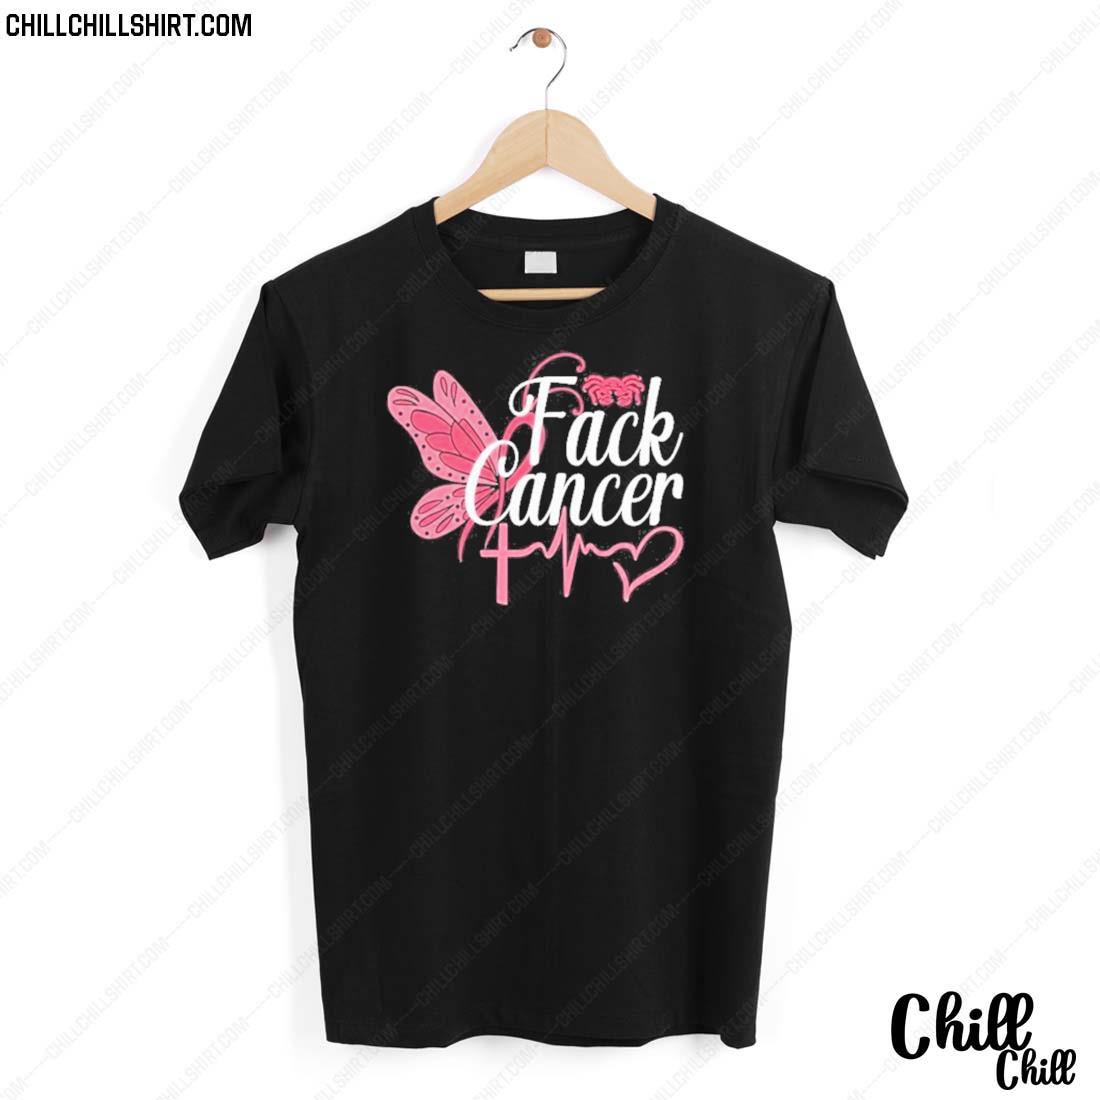 Nice fack Cancer Butterfly Breast Cancer Shirt